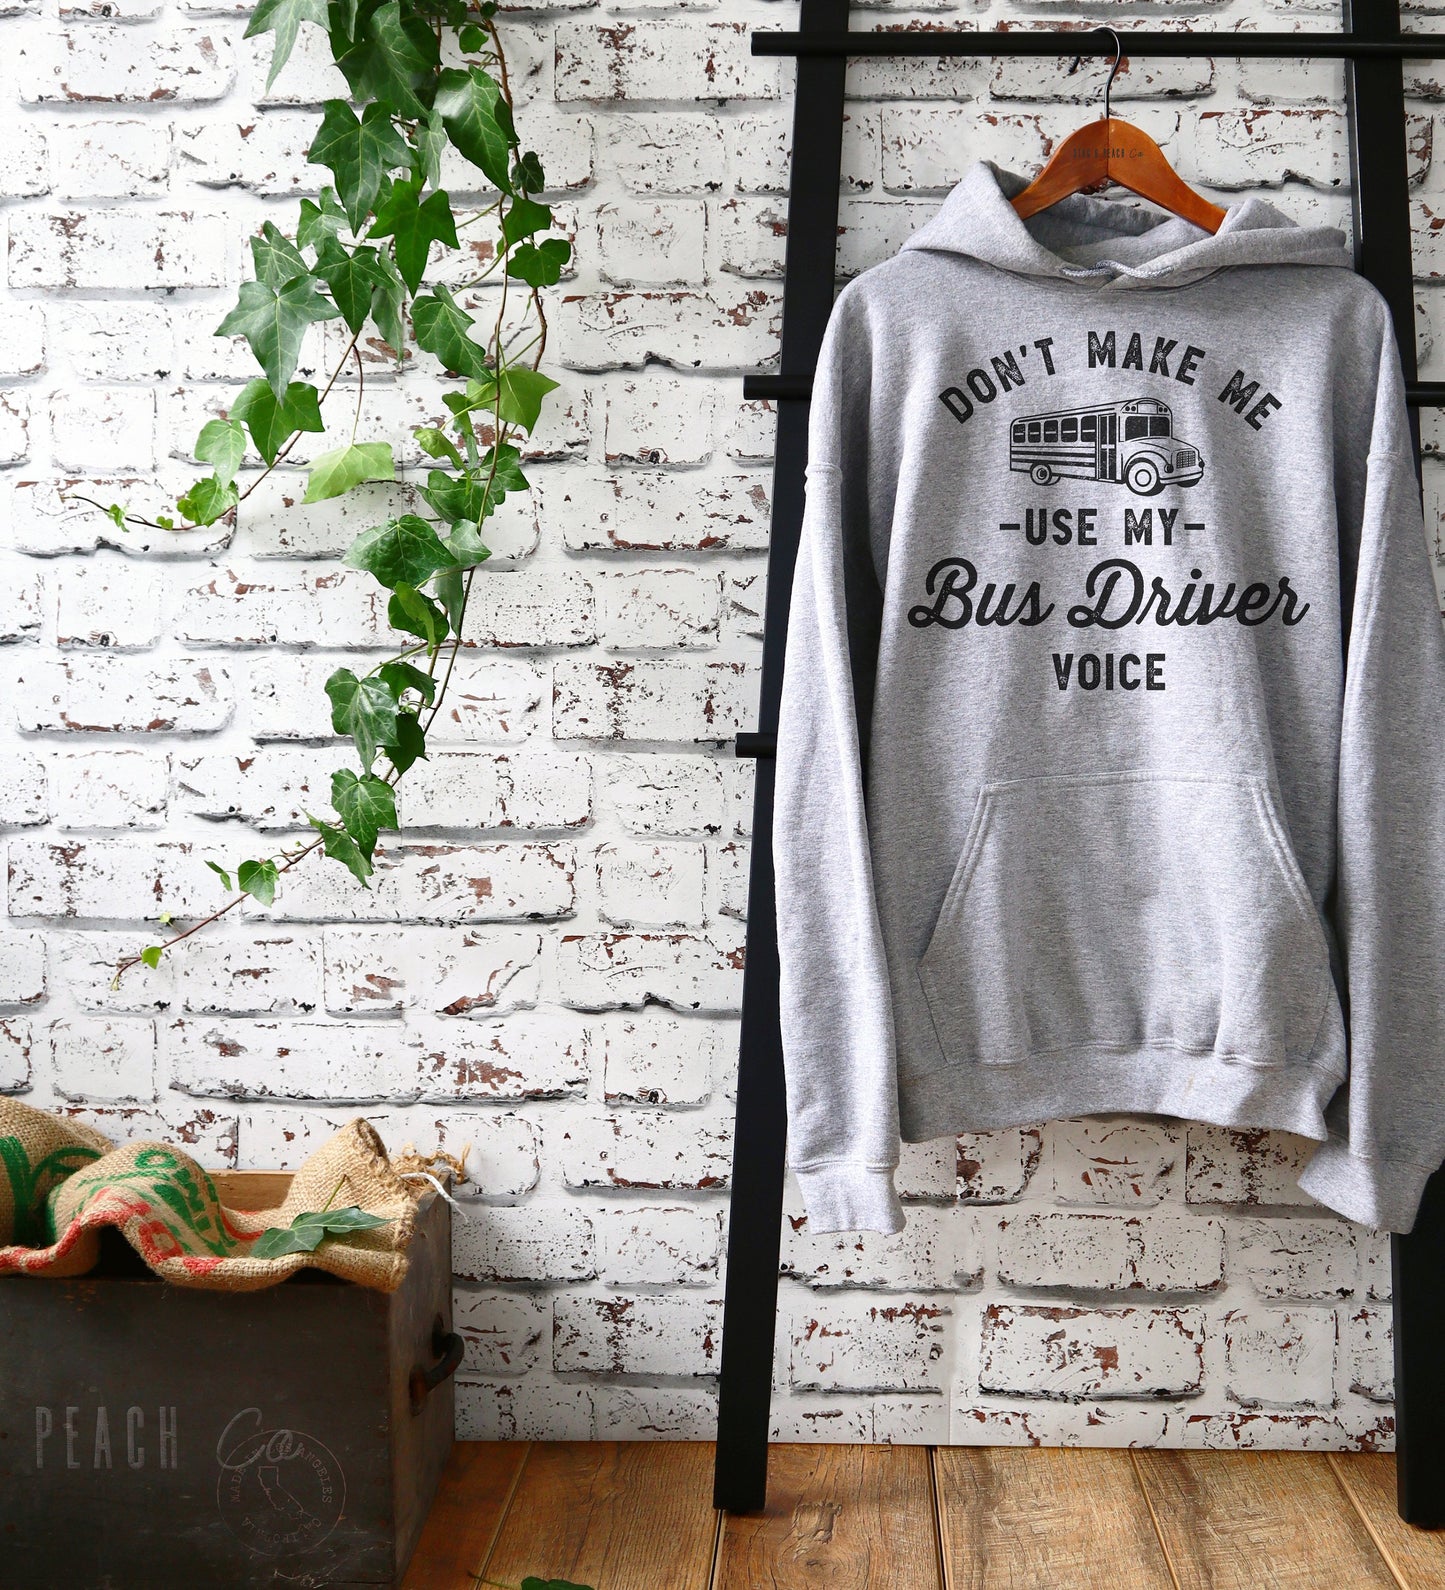 Don't Make Me Use My Bus Driver Voice Hoodie - Bus Driver Gift, Bus Driver Shirt, School Bus Driver, Back To School, Teacher Appreciation